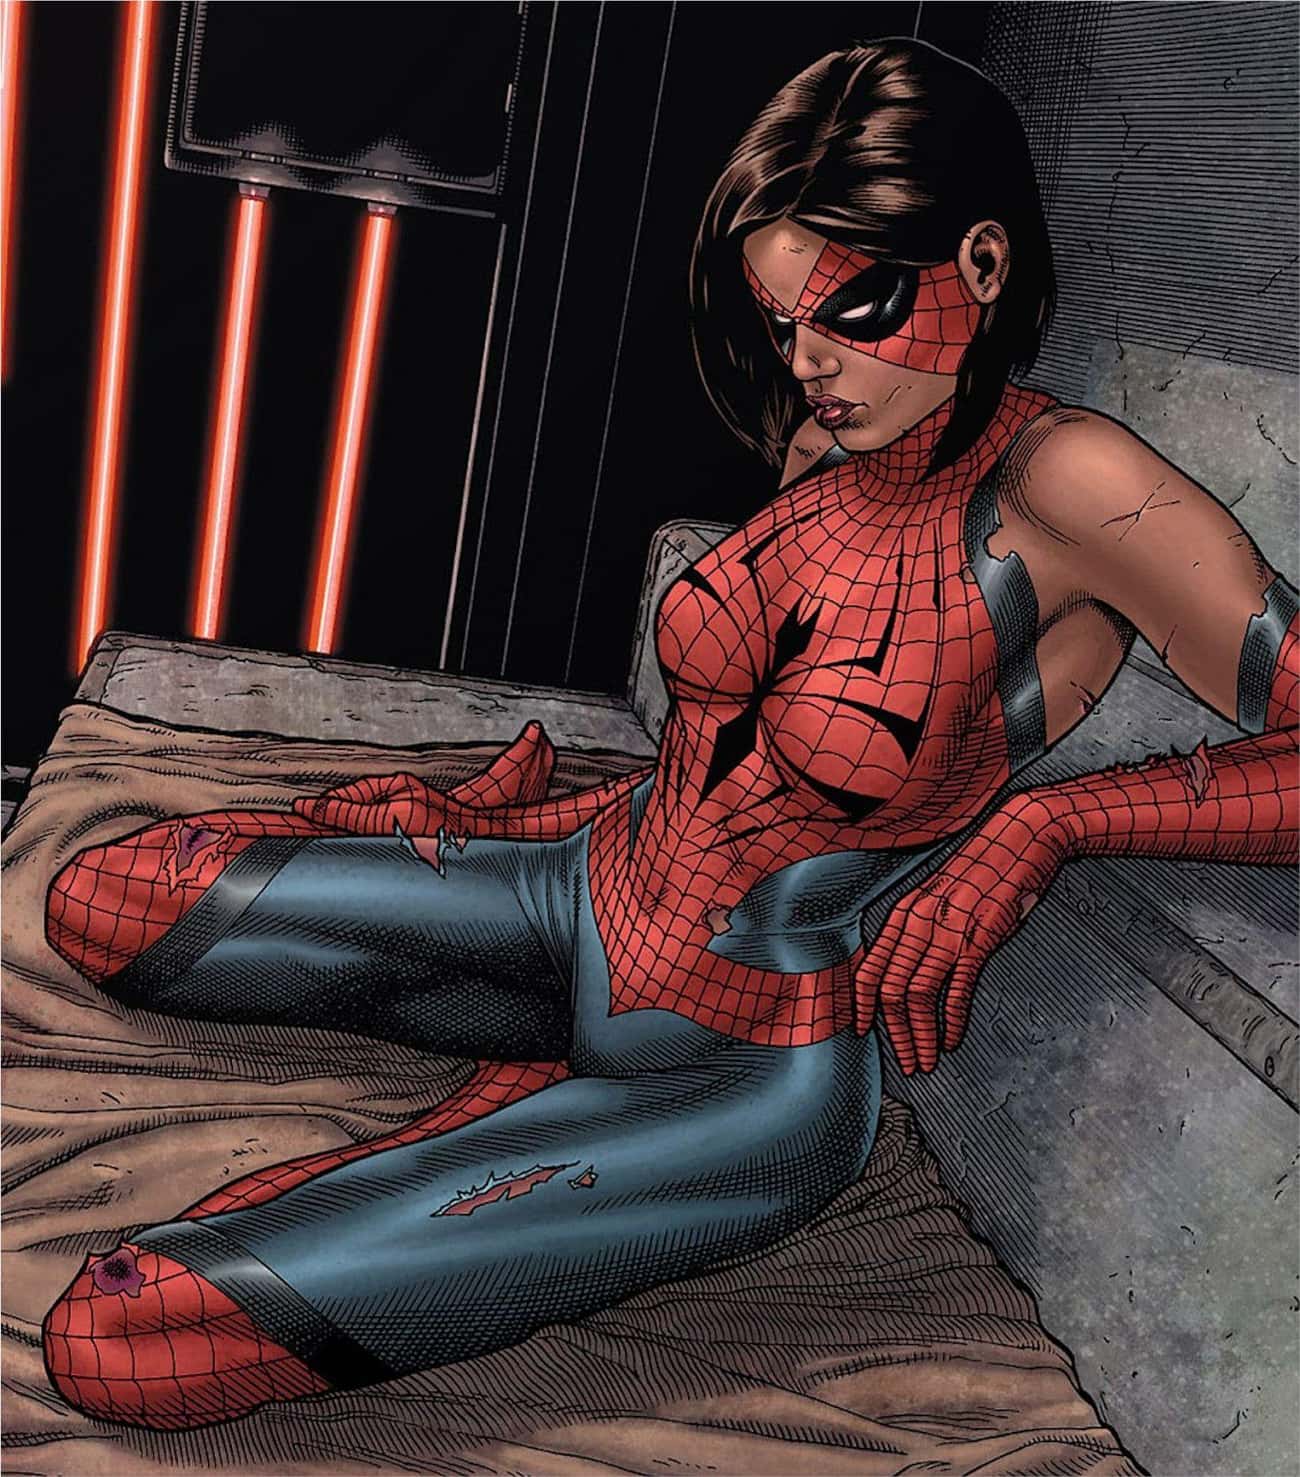 Hawkeye Married Spider-Man’s Daughter And Produced Ashley Barton, The Treacherous Spider-Woman Of The ‘Old Man Logan’ Timeline